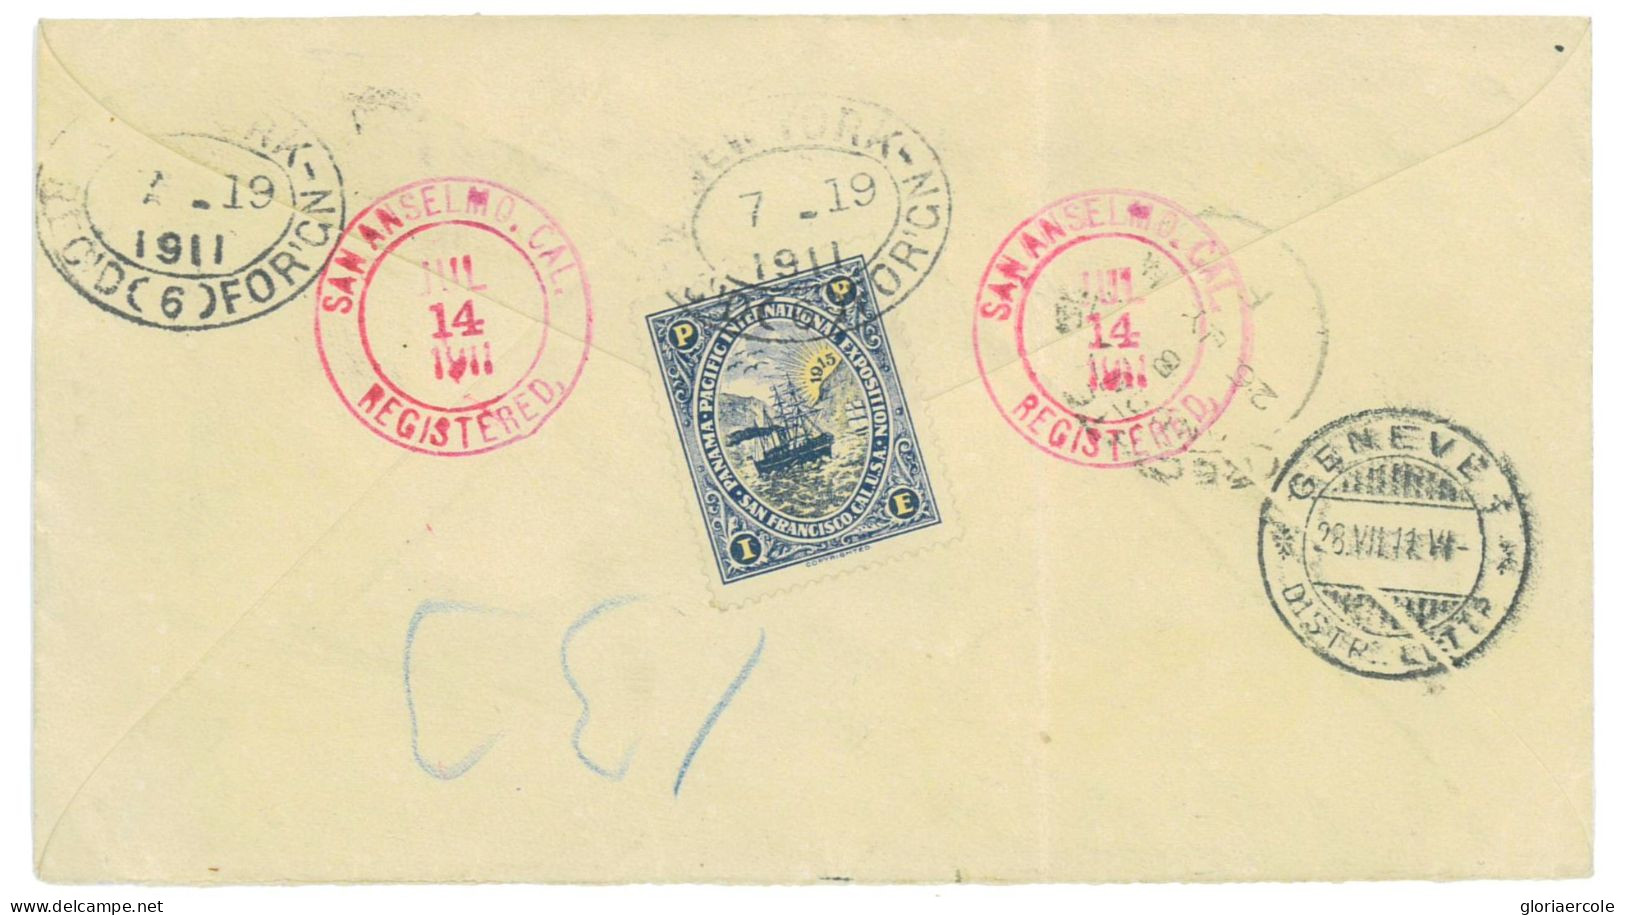 P2844 - USA, PRINTED 2 CENT COVER WITH A TRICOLOR FRANKING MAKING THE 15 CENT RATE FOR REGISTRATION TO EUROPE, 1911 - Covers & Documents